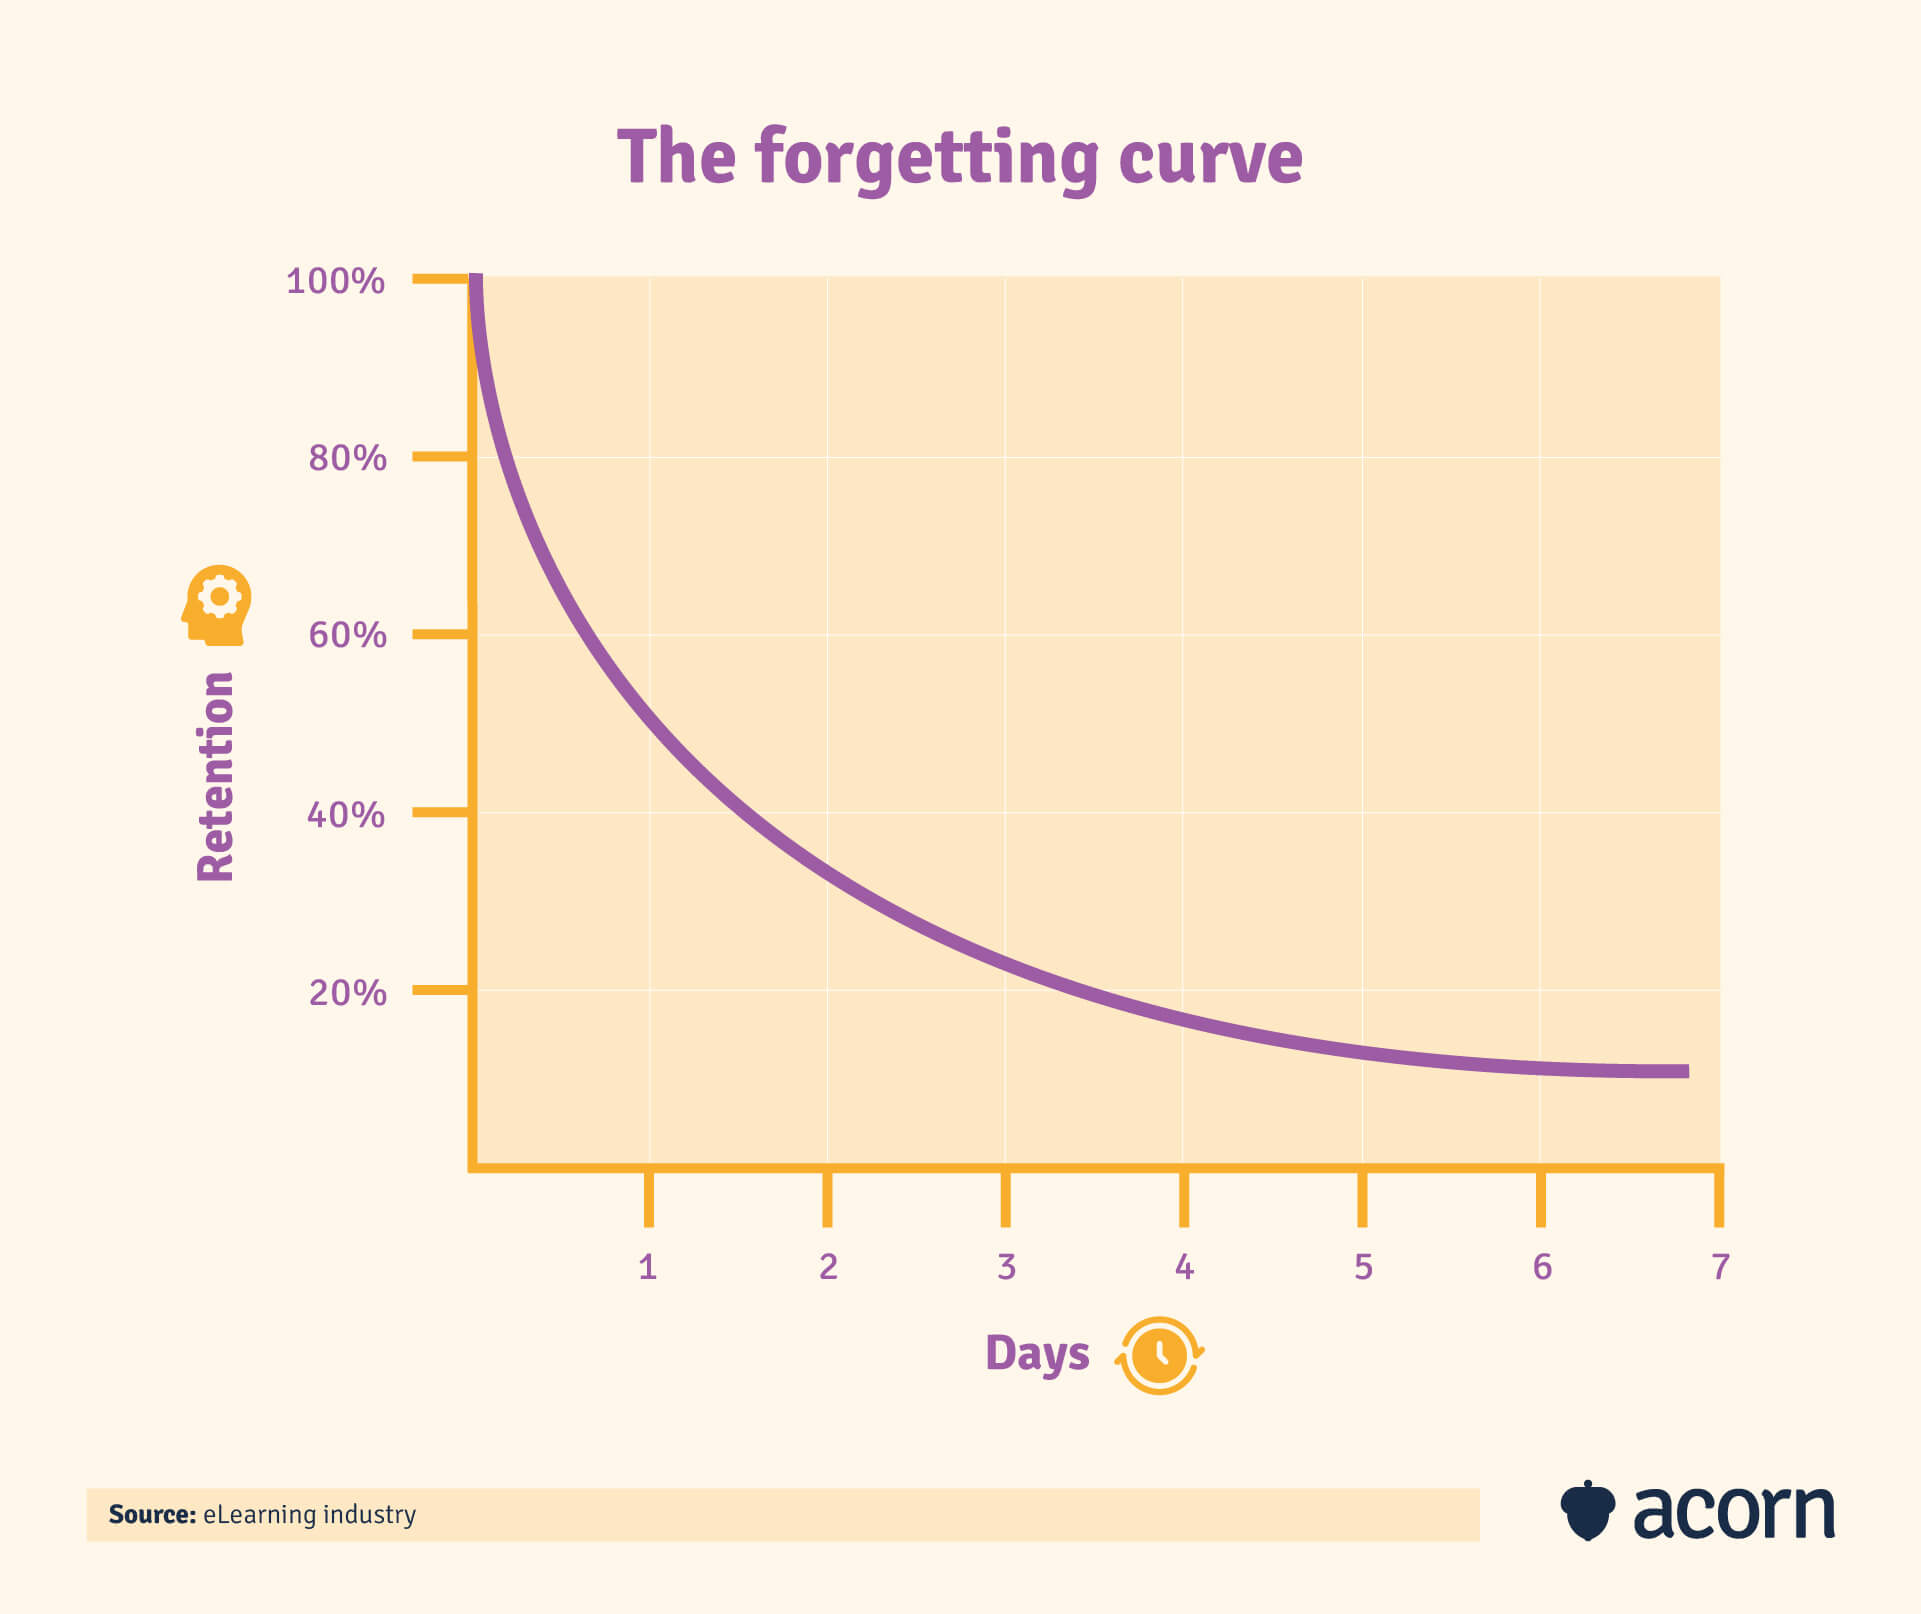 Line graph visualising the "forgetting curve" of knowledge lost.